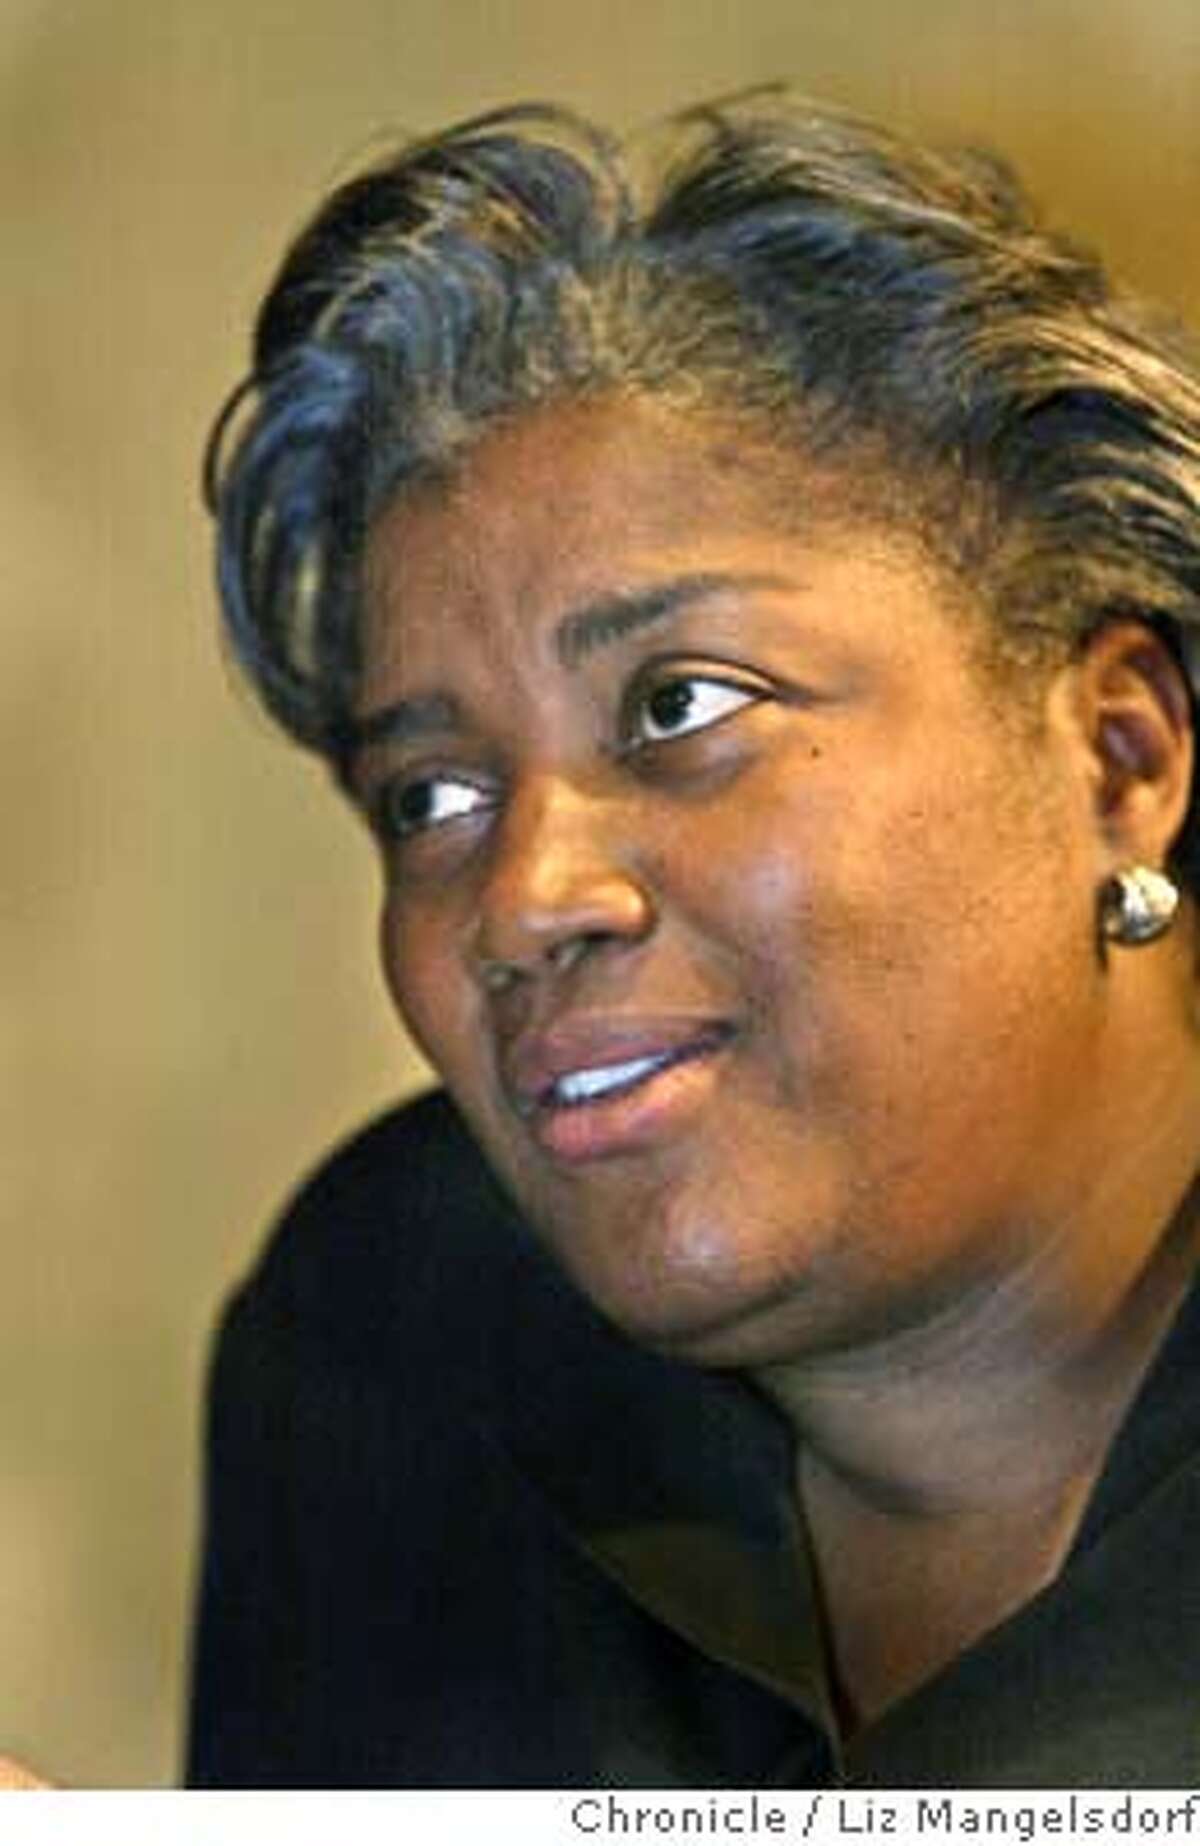 Event on 6/18/04 in San Francisco. Donna Brazile, Al Gore's presidential campaign manager, the first African-American woman to head a mainstream national presidential campaign. Photos taken during an interview at the Hotel Monaco. Liz Mangelsdorf / The Chronicle